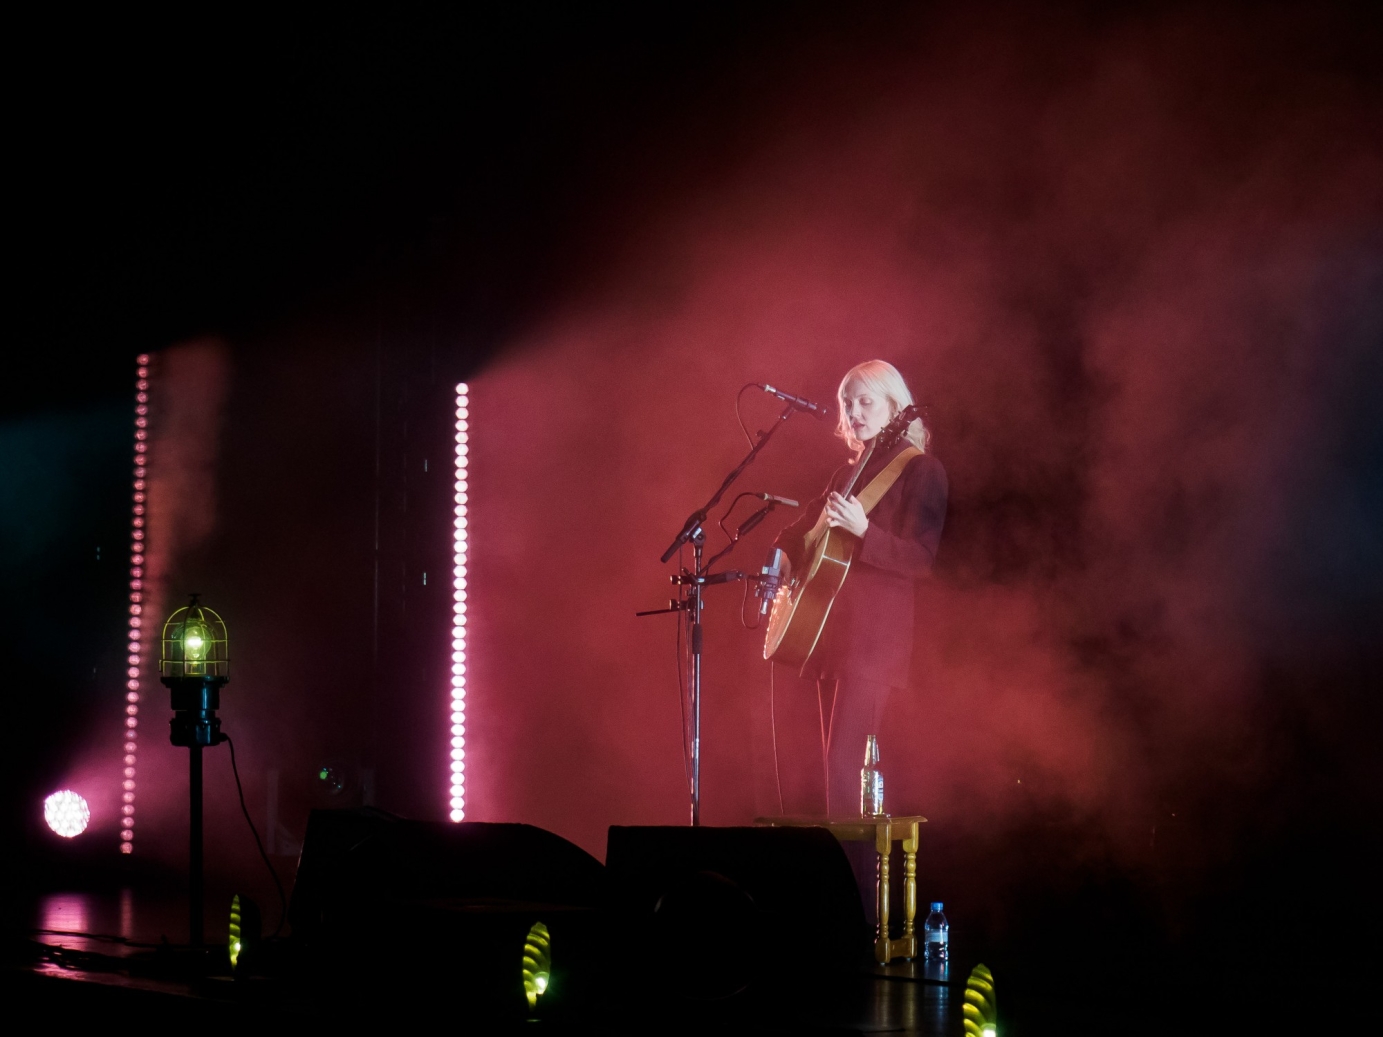 Laura Marling in concert, Brighton Dome, 19 October 2021